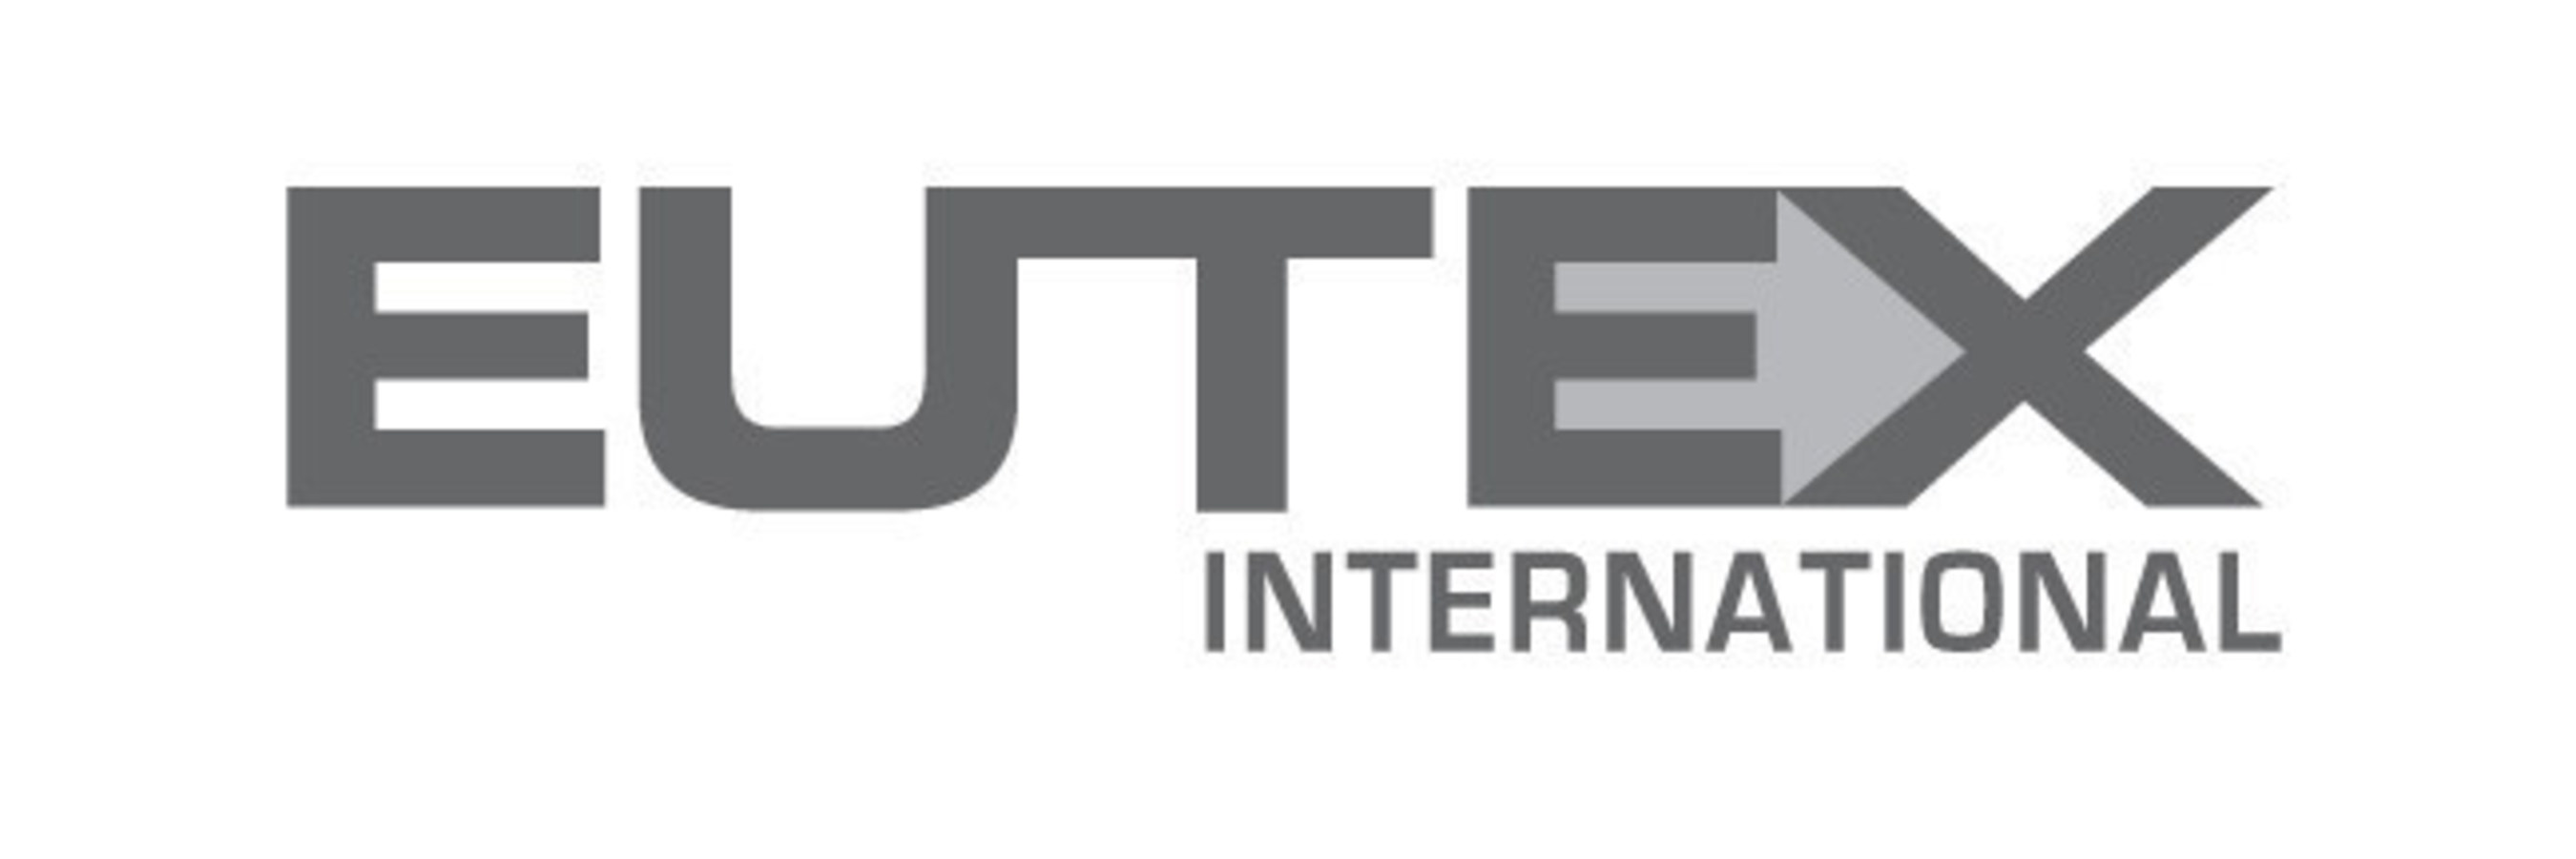 EUTEX Group Expands Further Into Middle East Region